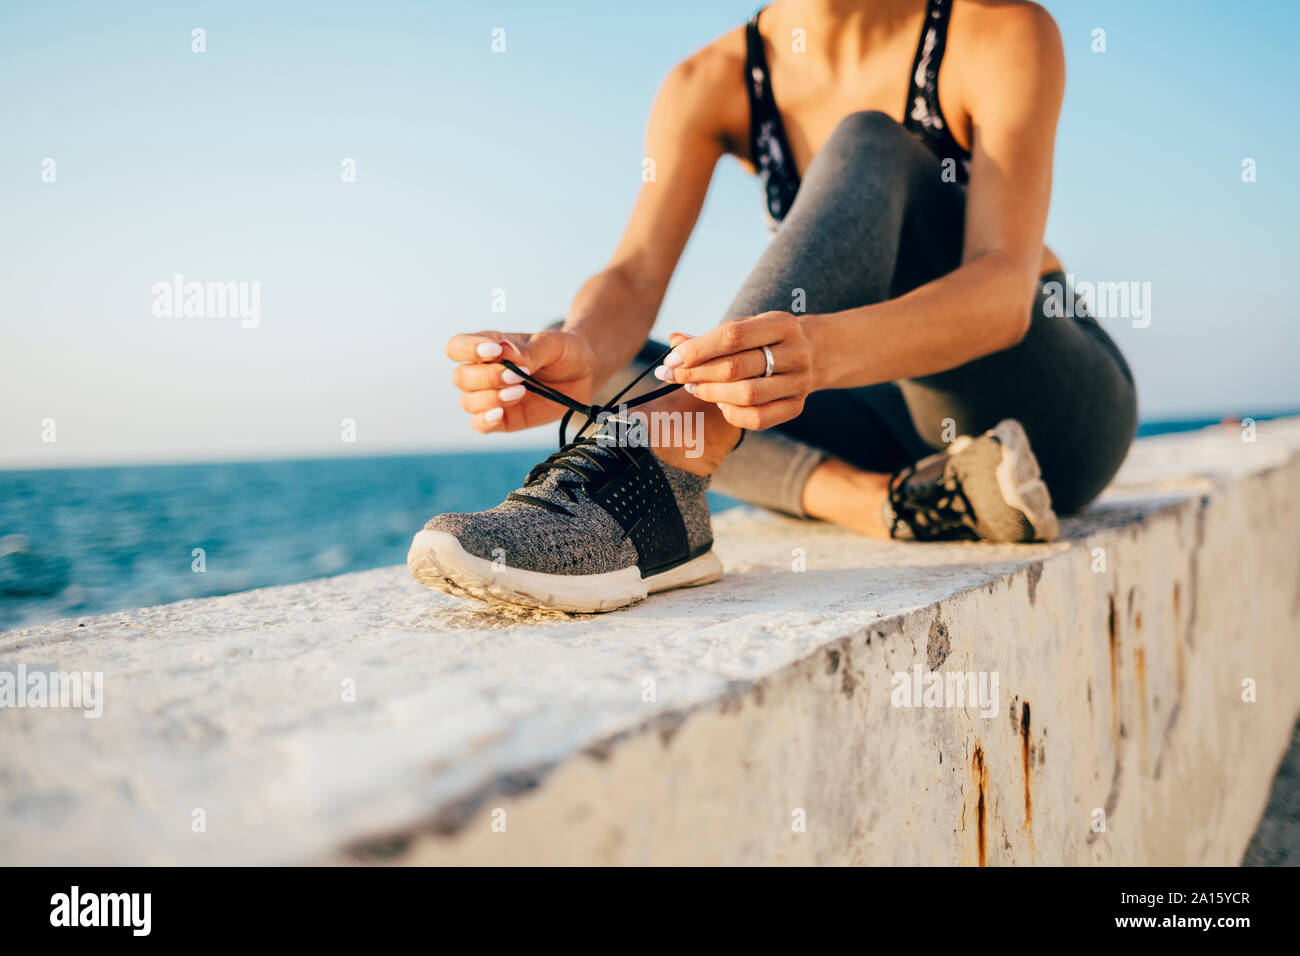 Sportswoman sitting on a wall and tying running shoe Stock Photo